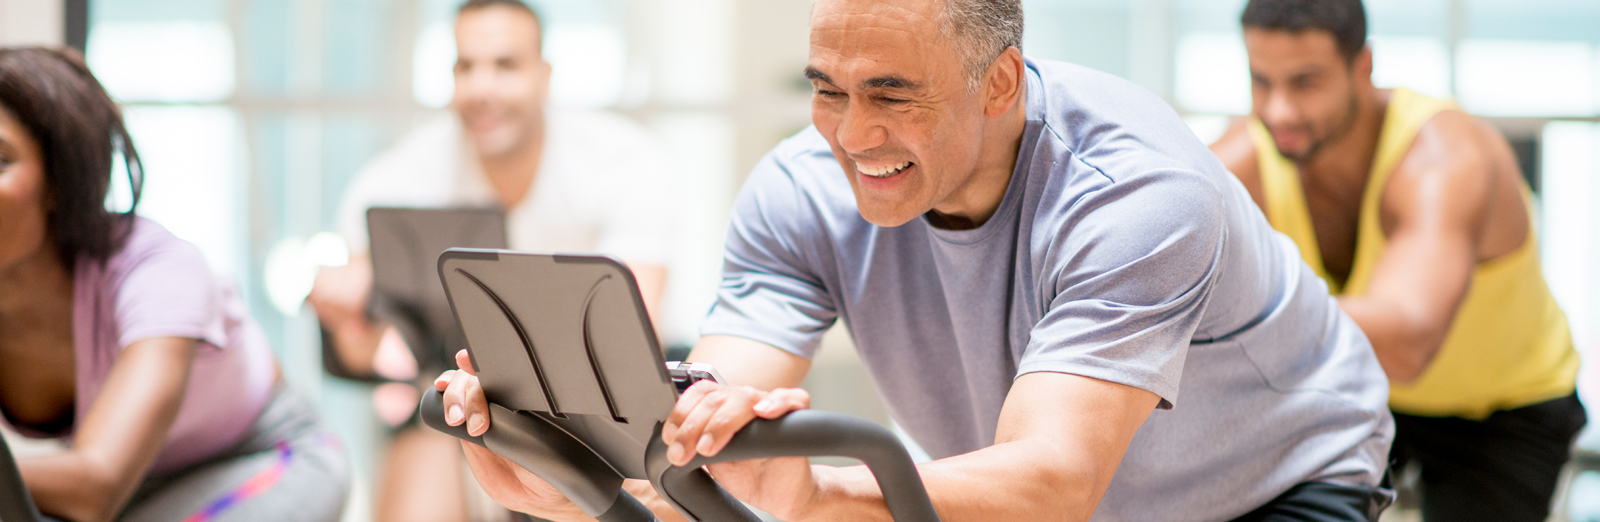 Older man smiling while cycling on an exercise bike at a spin class